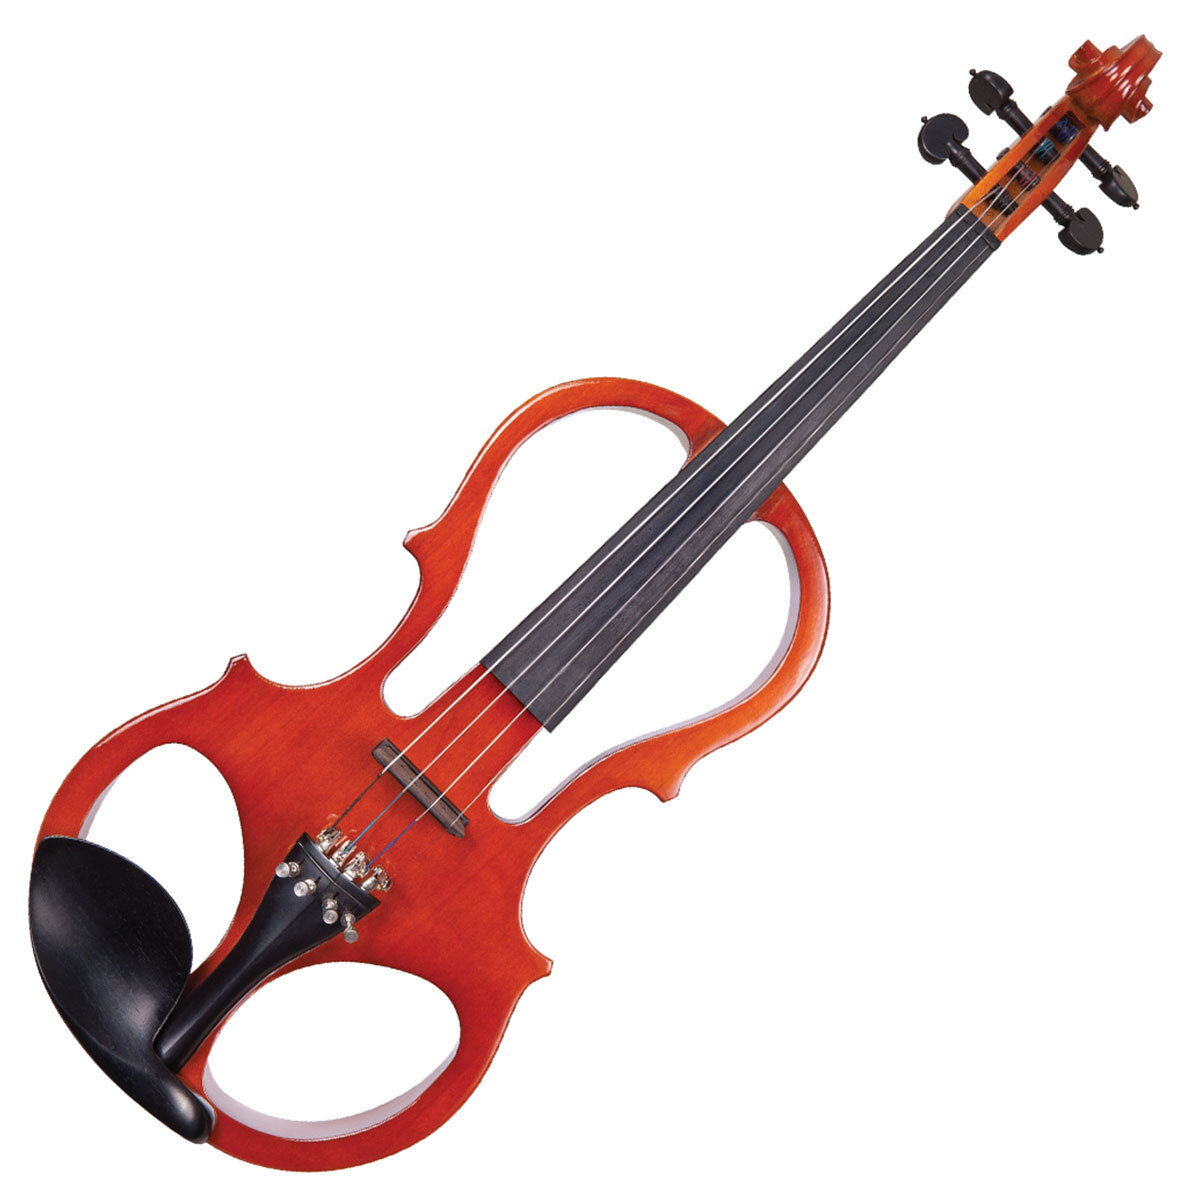 Angled view of electric violin